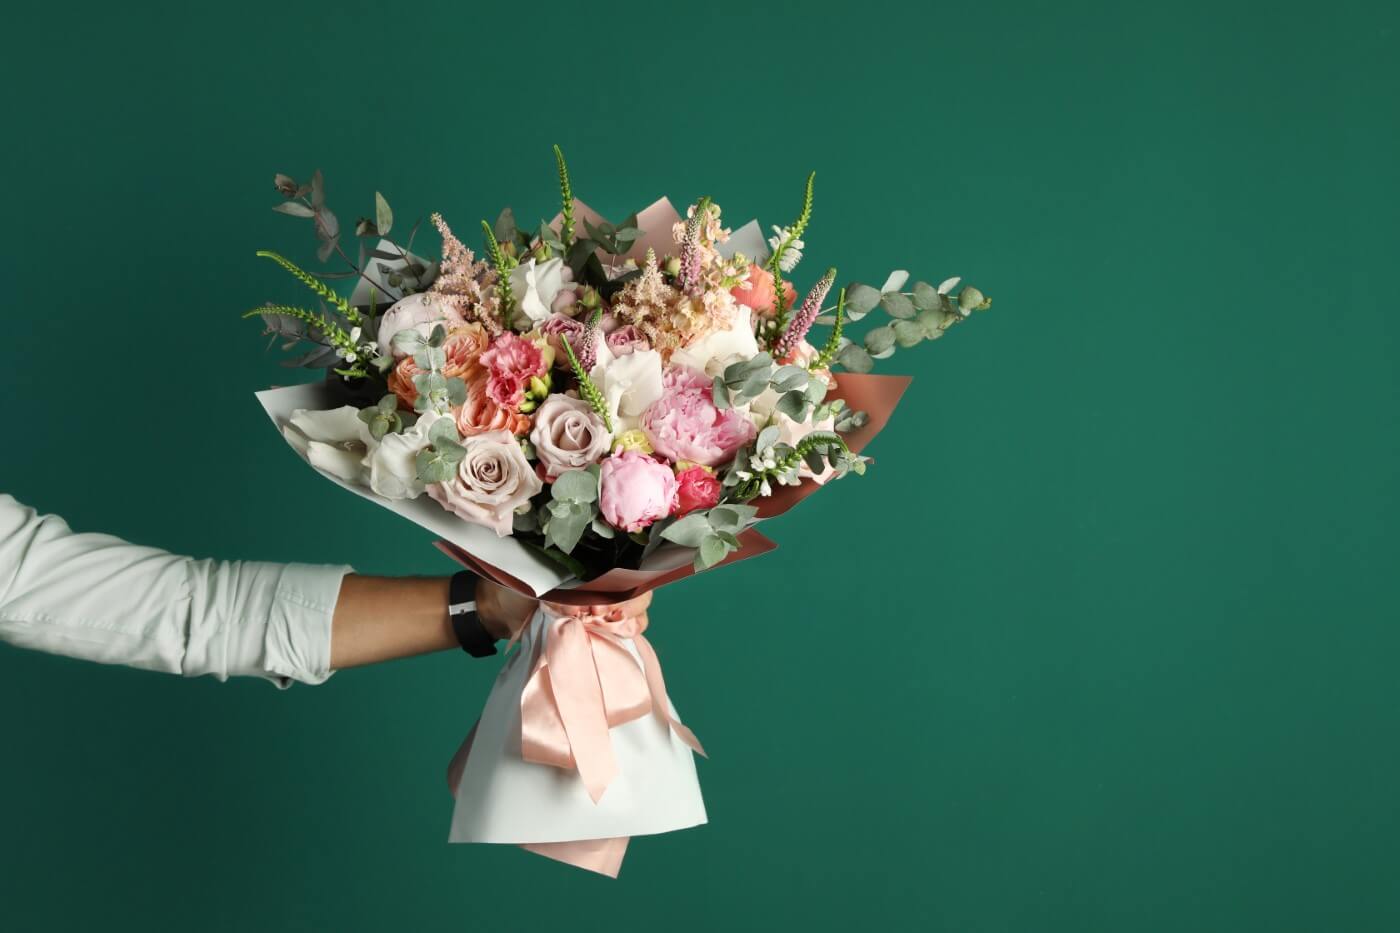 Create Wonderful Memories for Your Loved Ones by Sending Gorgeous Flowers